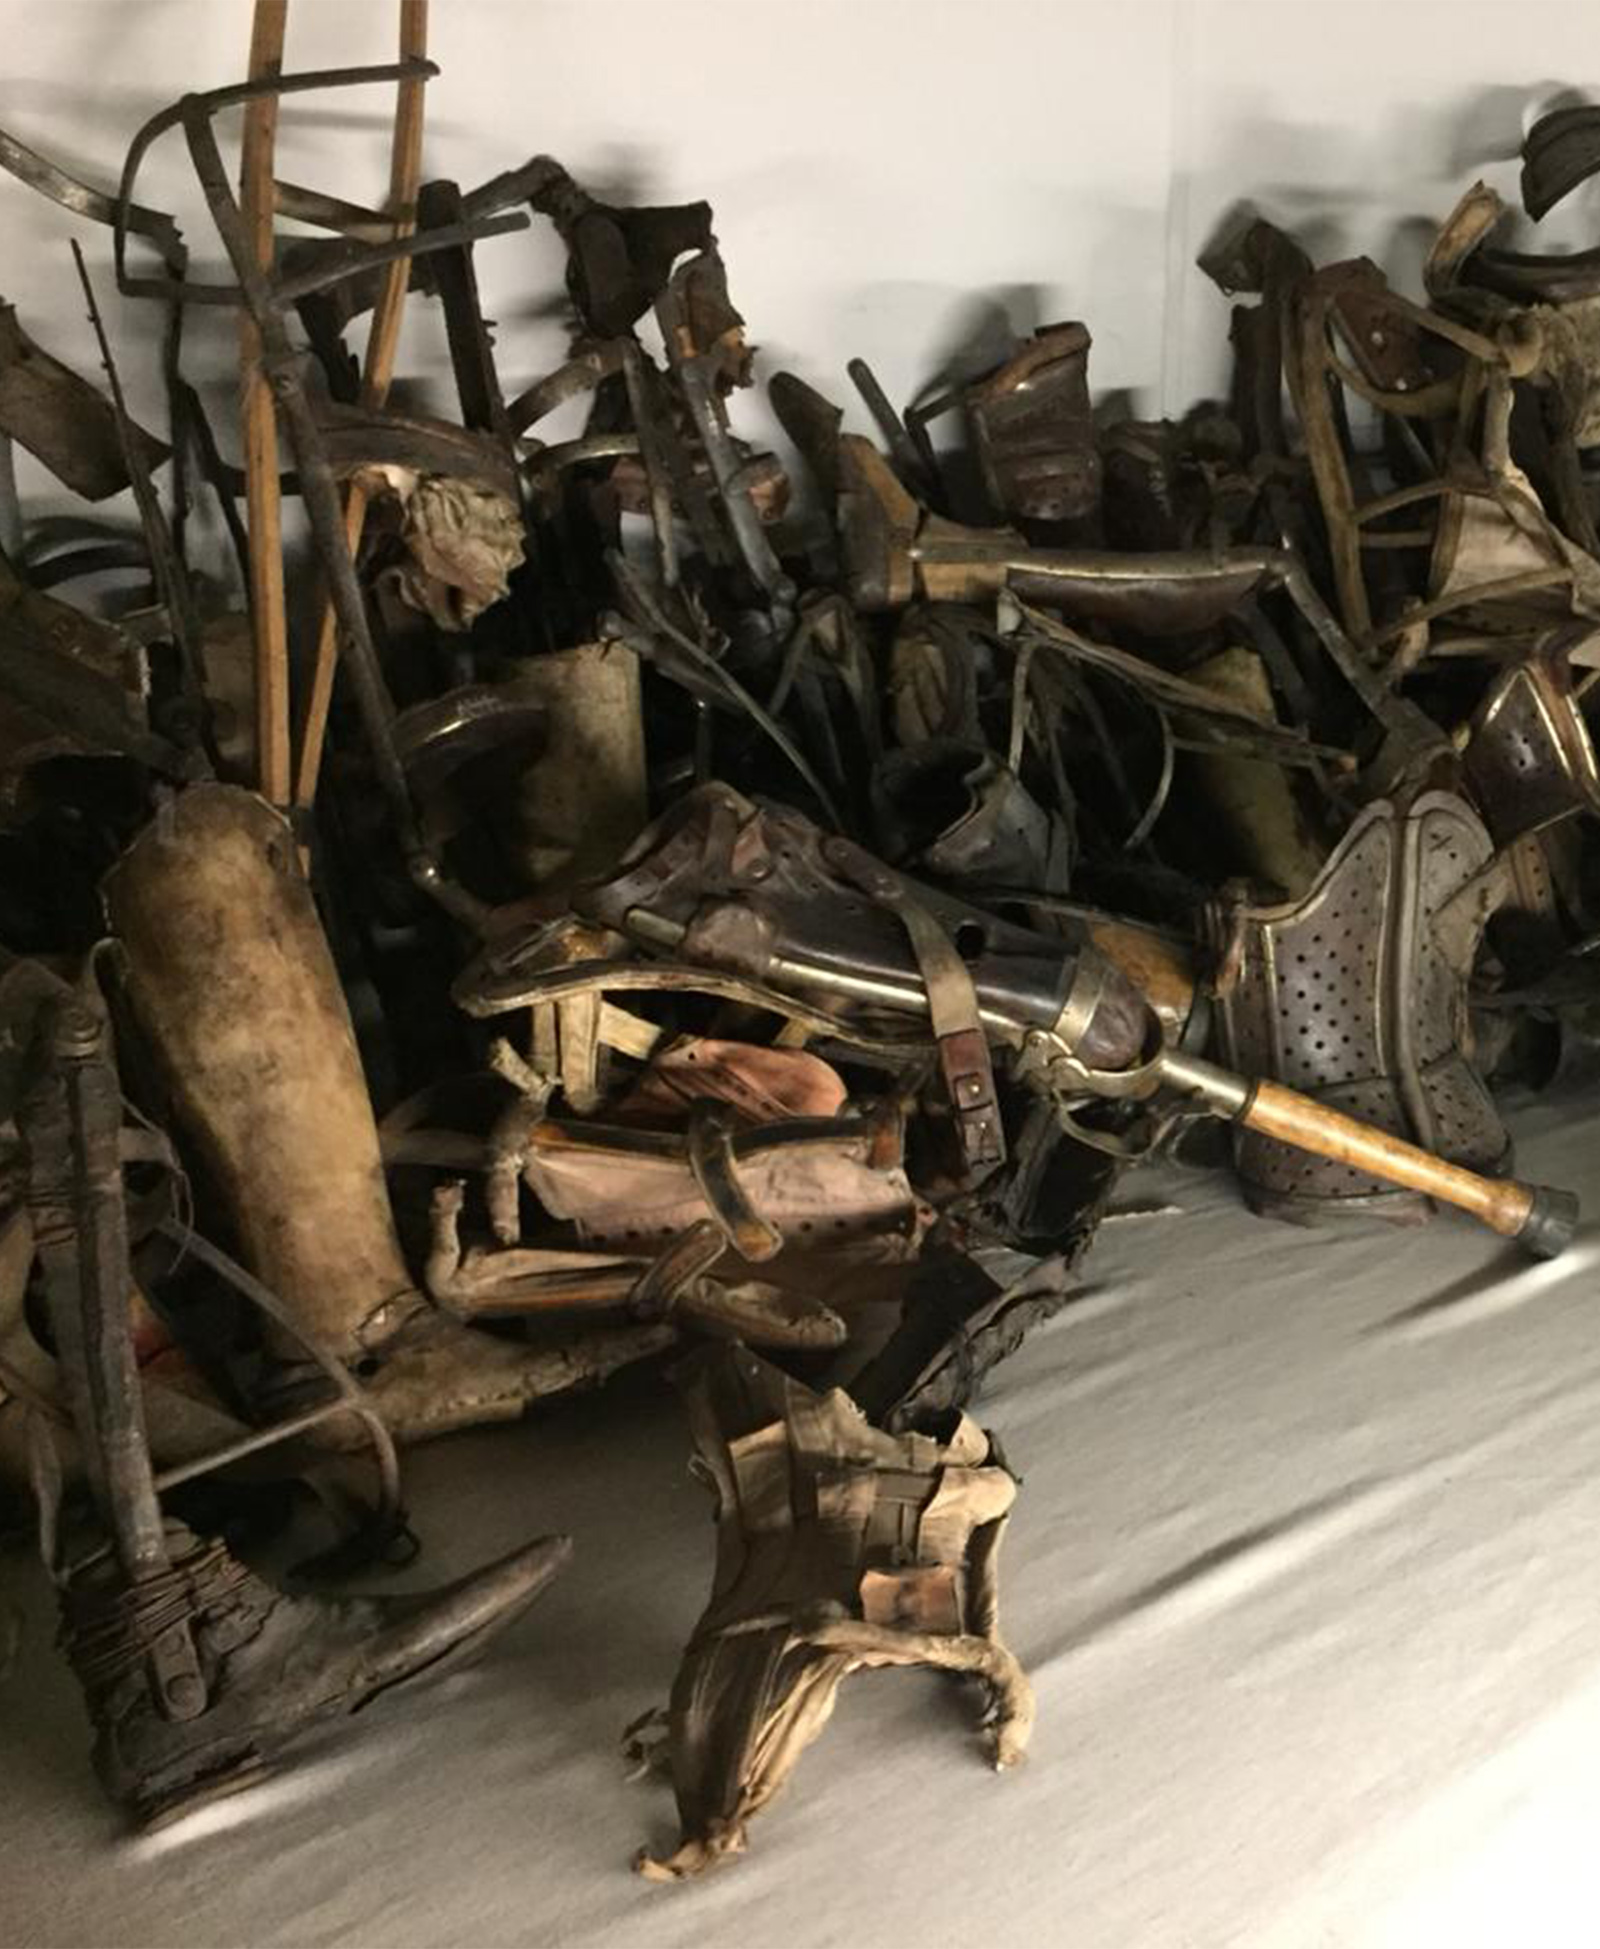 Prosthetics stolen from from victims at Auschwitz